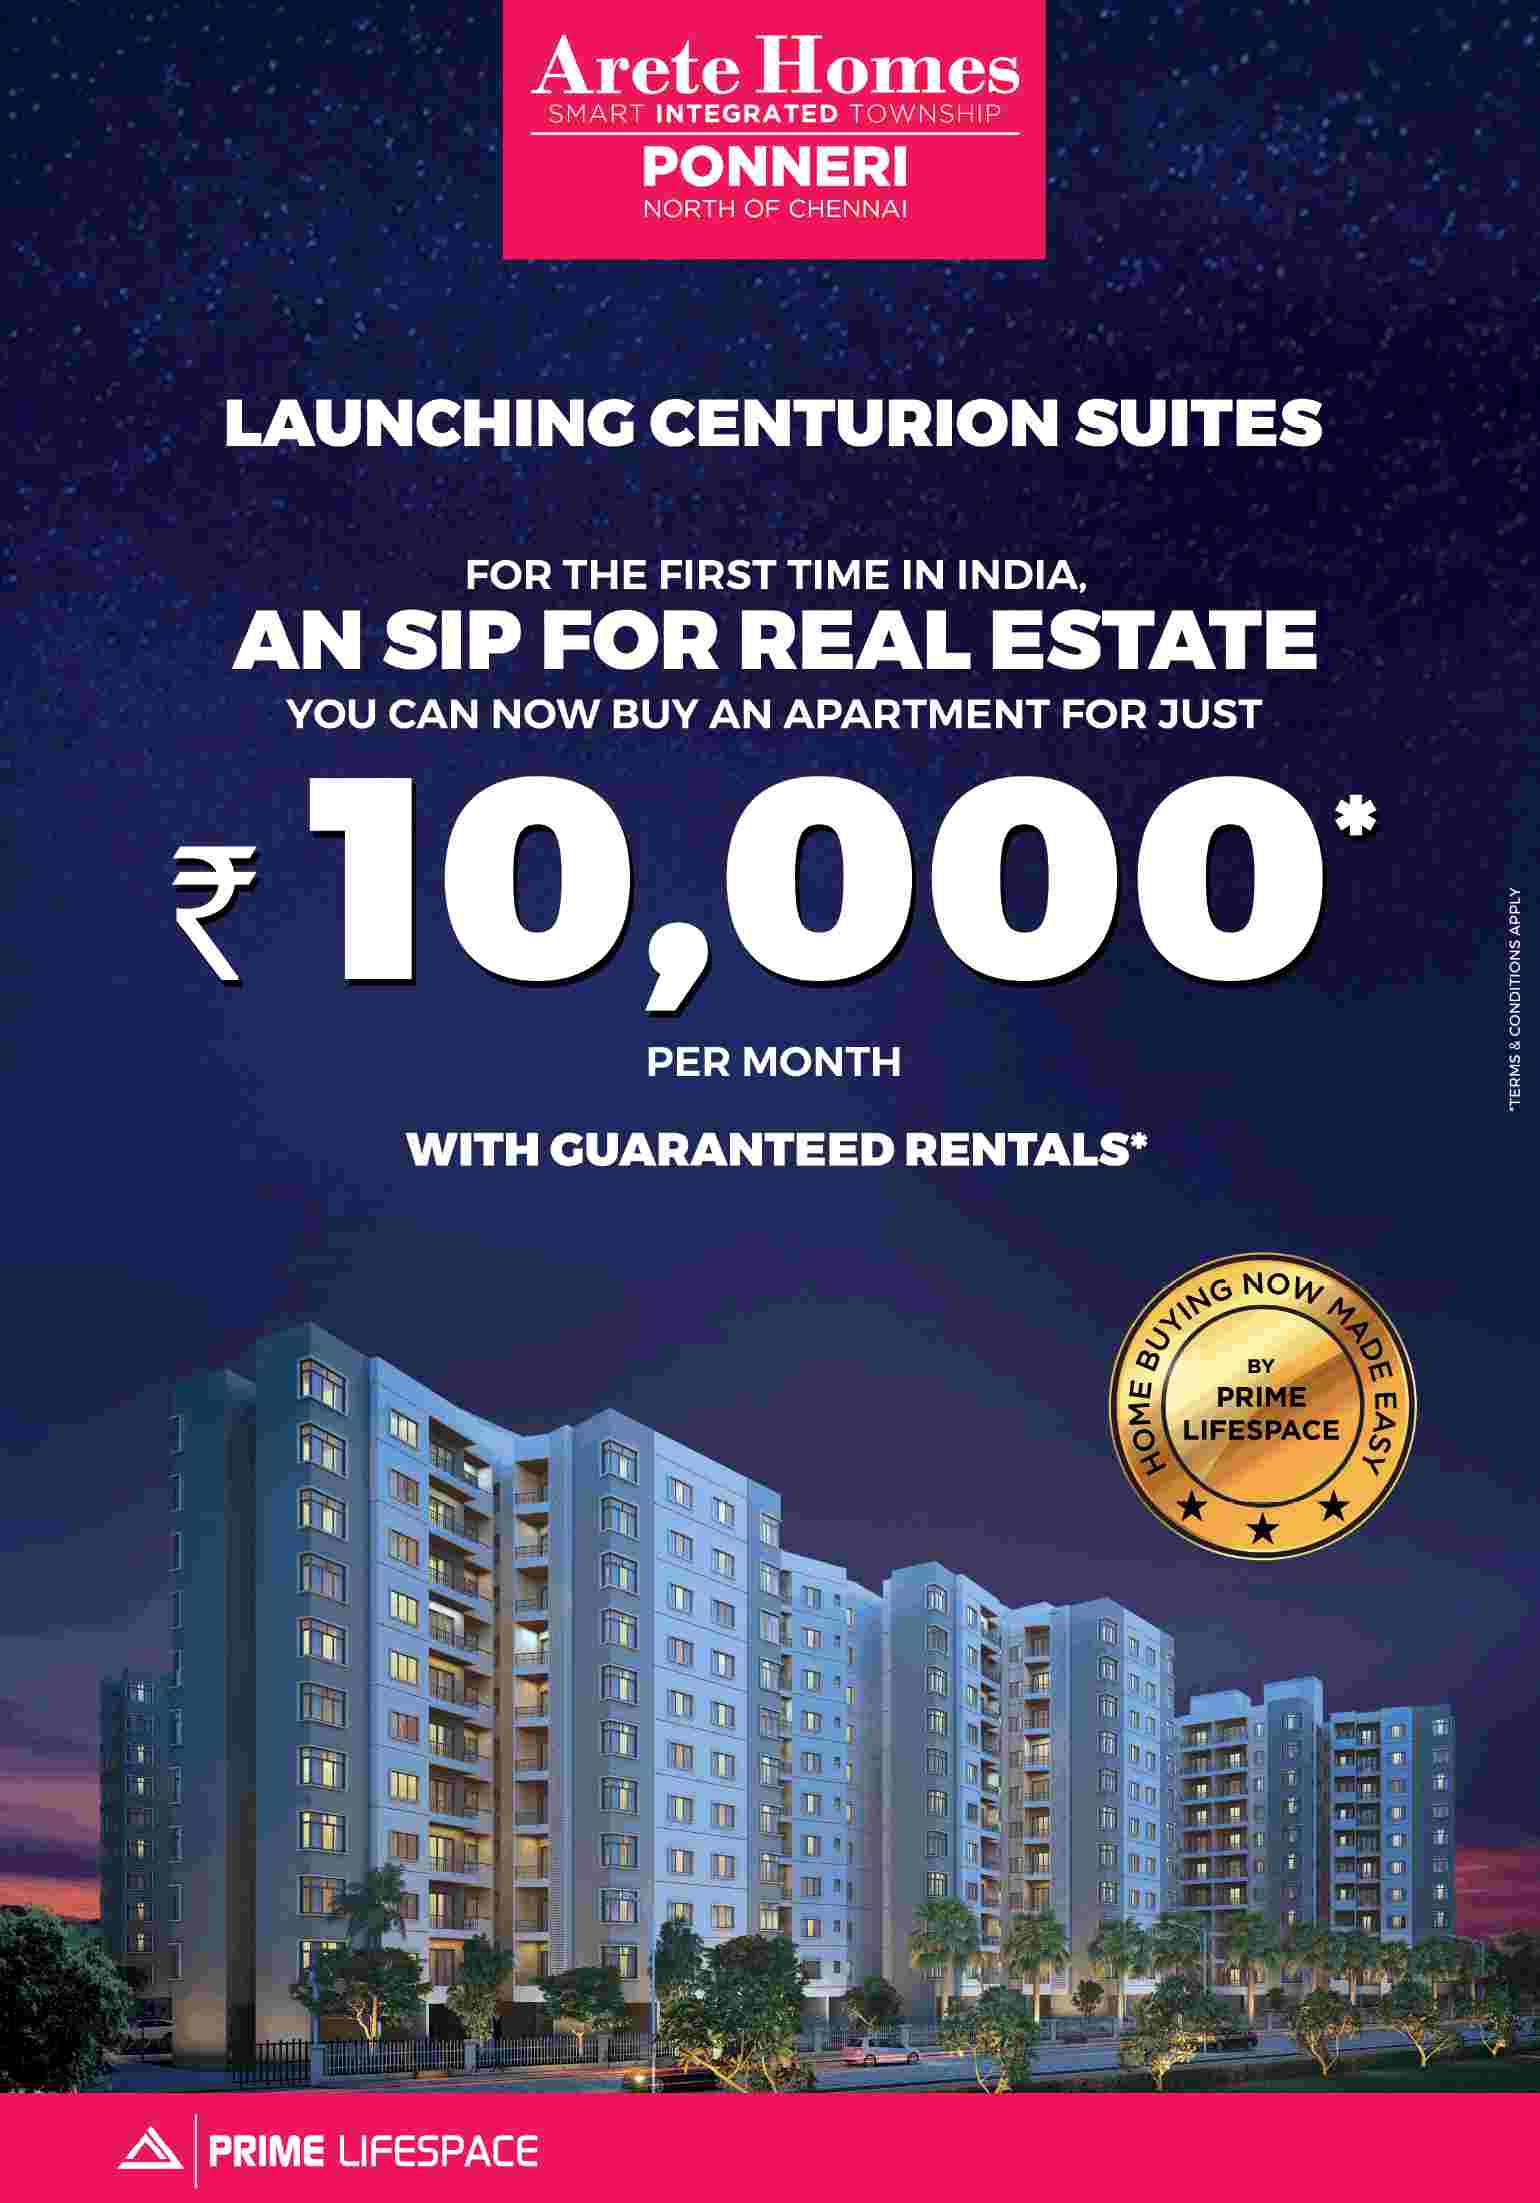 Buy home for just Rs. 10,000 per month with guaranteed rentals at Prime Arete Homes in Chennai Update